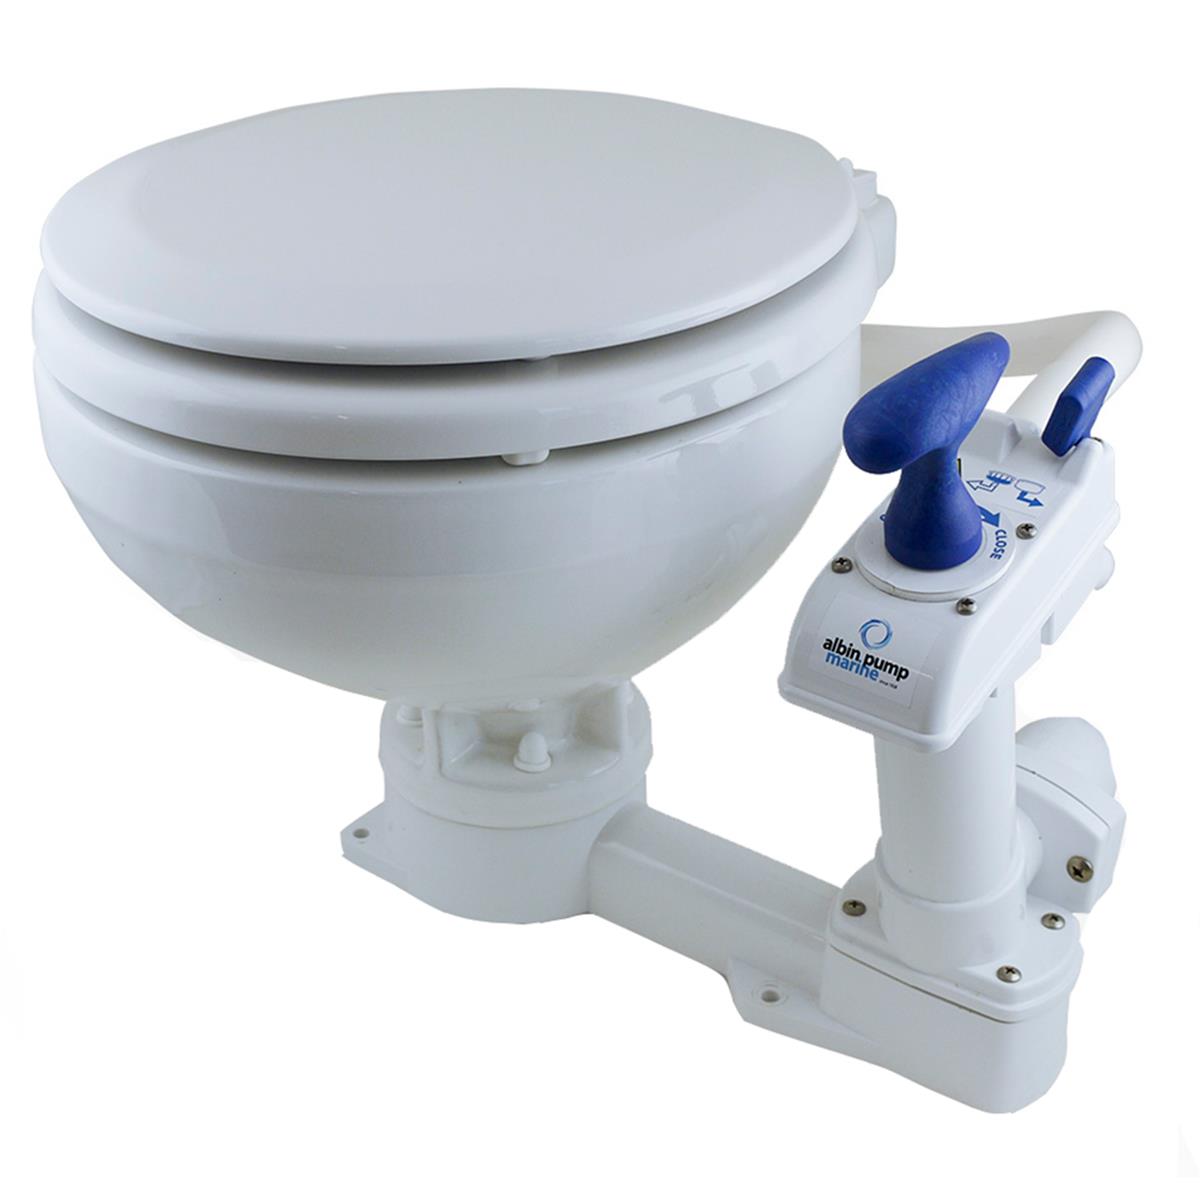 Picture of Albin Pump Marine 07-01-003 Toilet Manual Compact Low